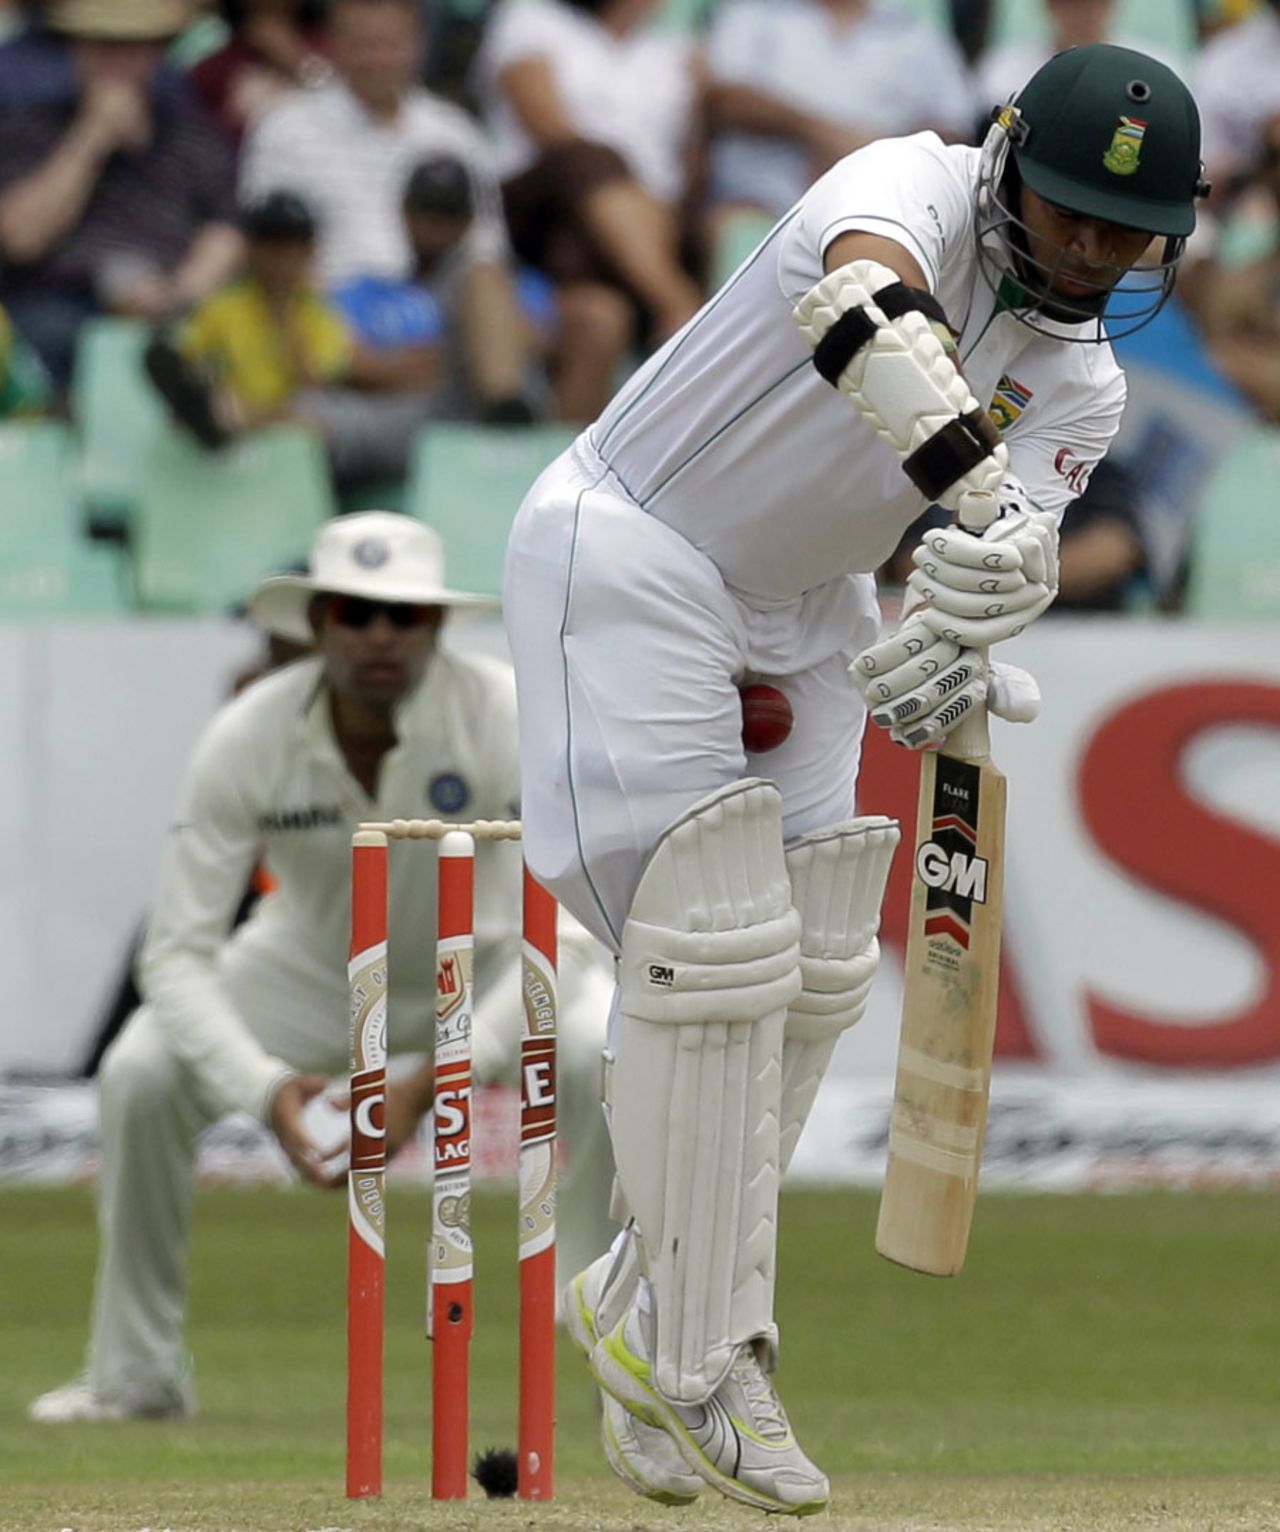 Ashwell Prince is hit in an uncomfortable area by a Zaheer Khan delivery, South Africa v India, 2nd Test, Durban, 2nd day, December 27, 2010 